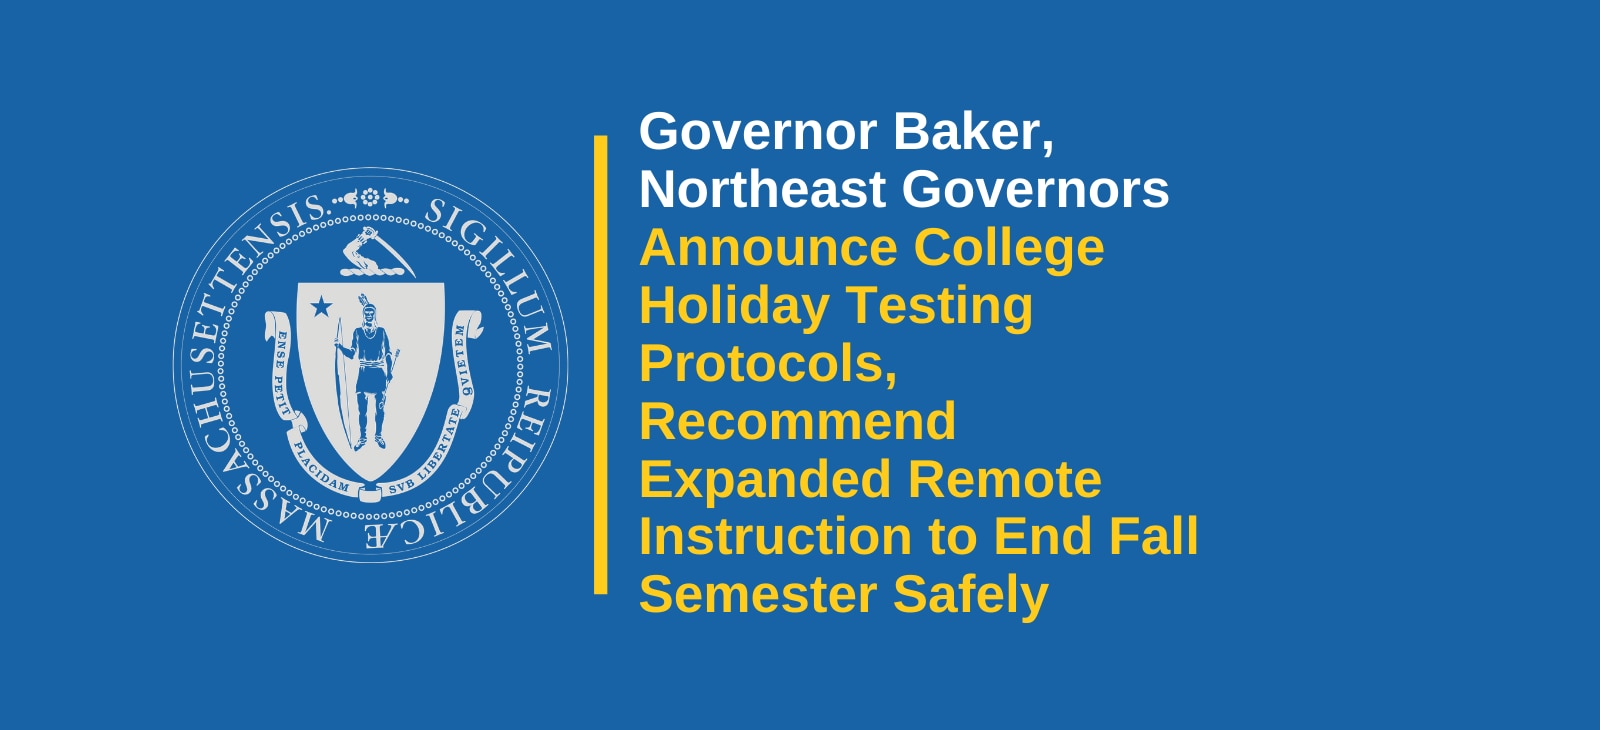 Regional Coalition of Northeastern Governors Announce Colleges will be Encouraged to Provide Testing for Students Before Leaving for Thanksgiving Break, Recommend Expanded Remote Instruction to End Fall Semester Safely